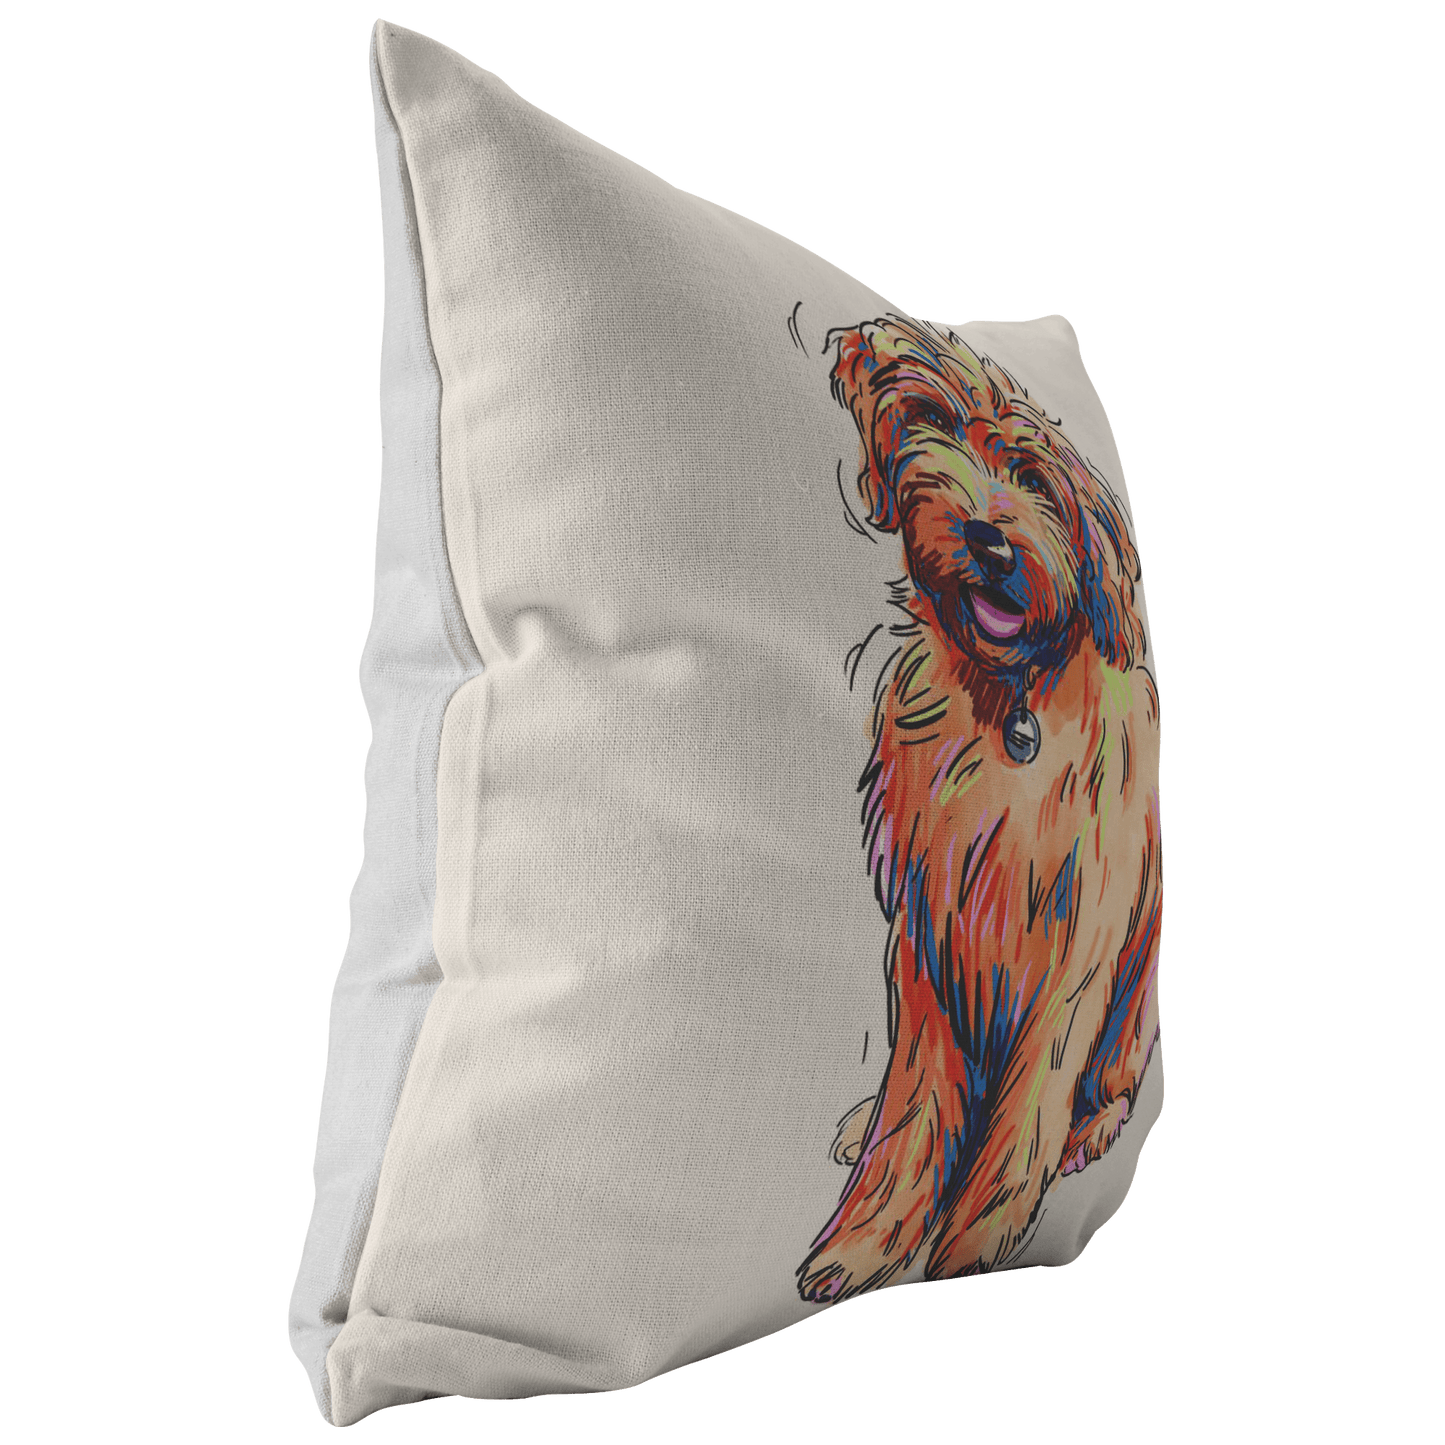 Goldendoodle Pillow Cover Only One Sided Print, No Insert Included, No Home is Complete Without a Golden Doodle,